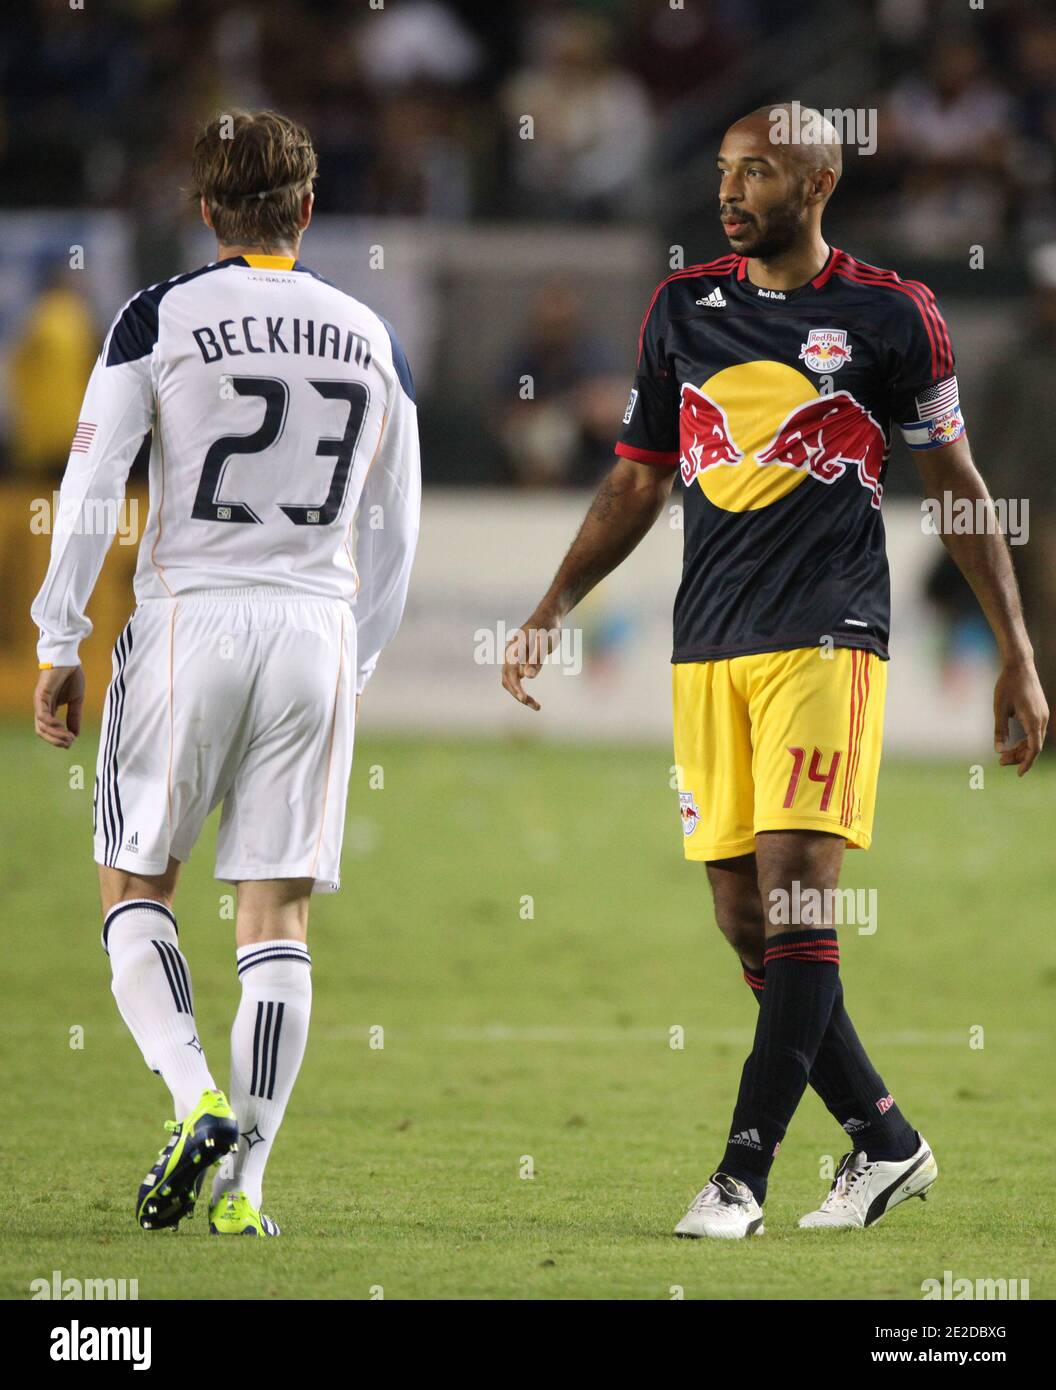 Thierry Henry And David Beckham At The Western Conference Mls Semifinal At The Home Depot Center In Los Angeles Ca Usa On November 3 2011 Photo By Lionel Hahn Abacapress Com Stock Photo